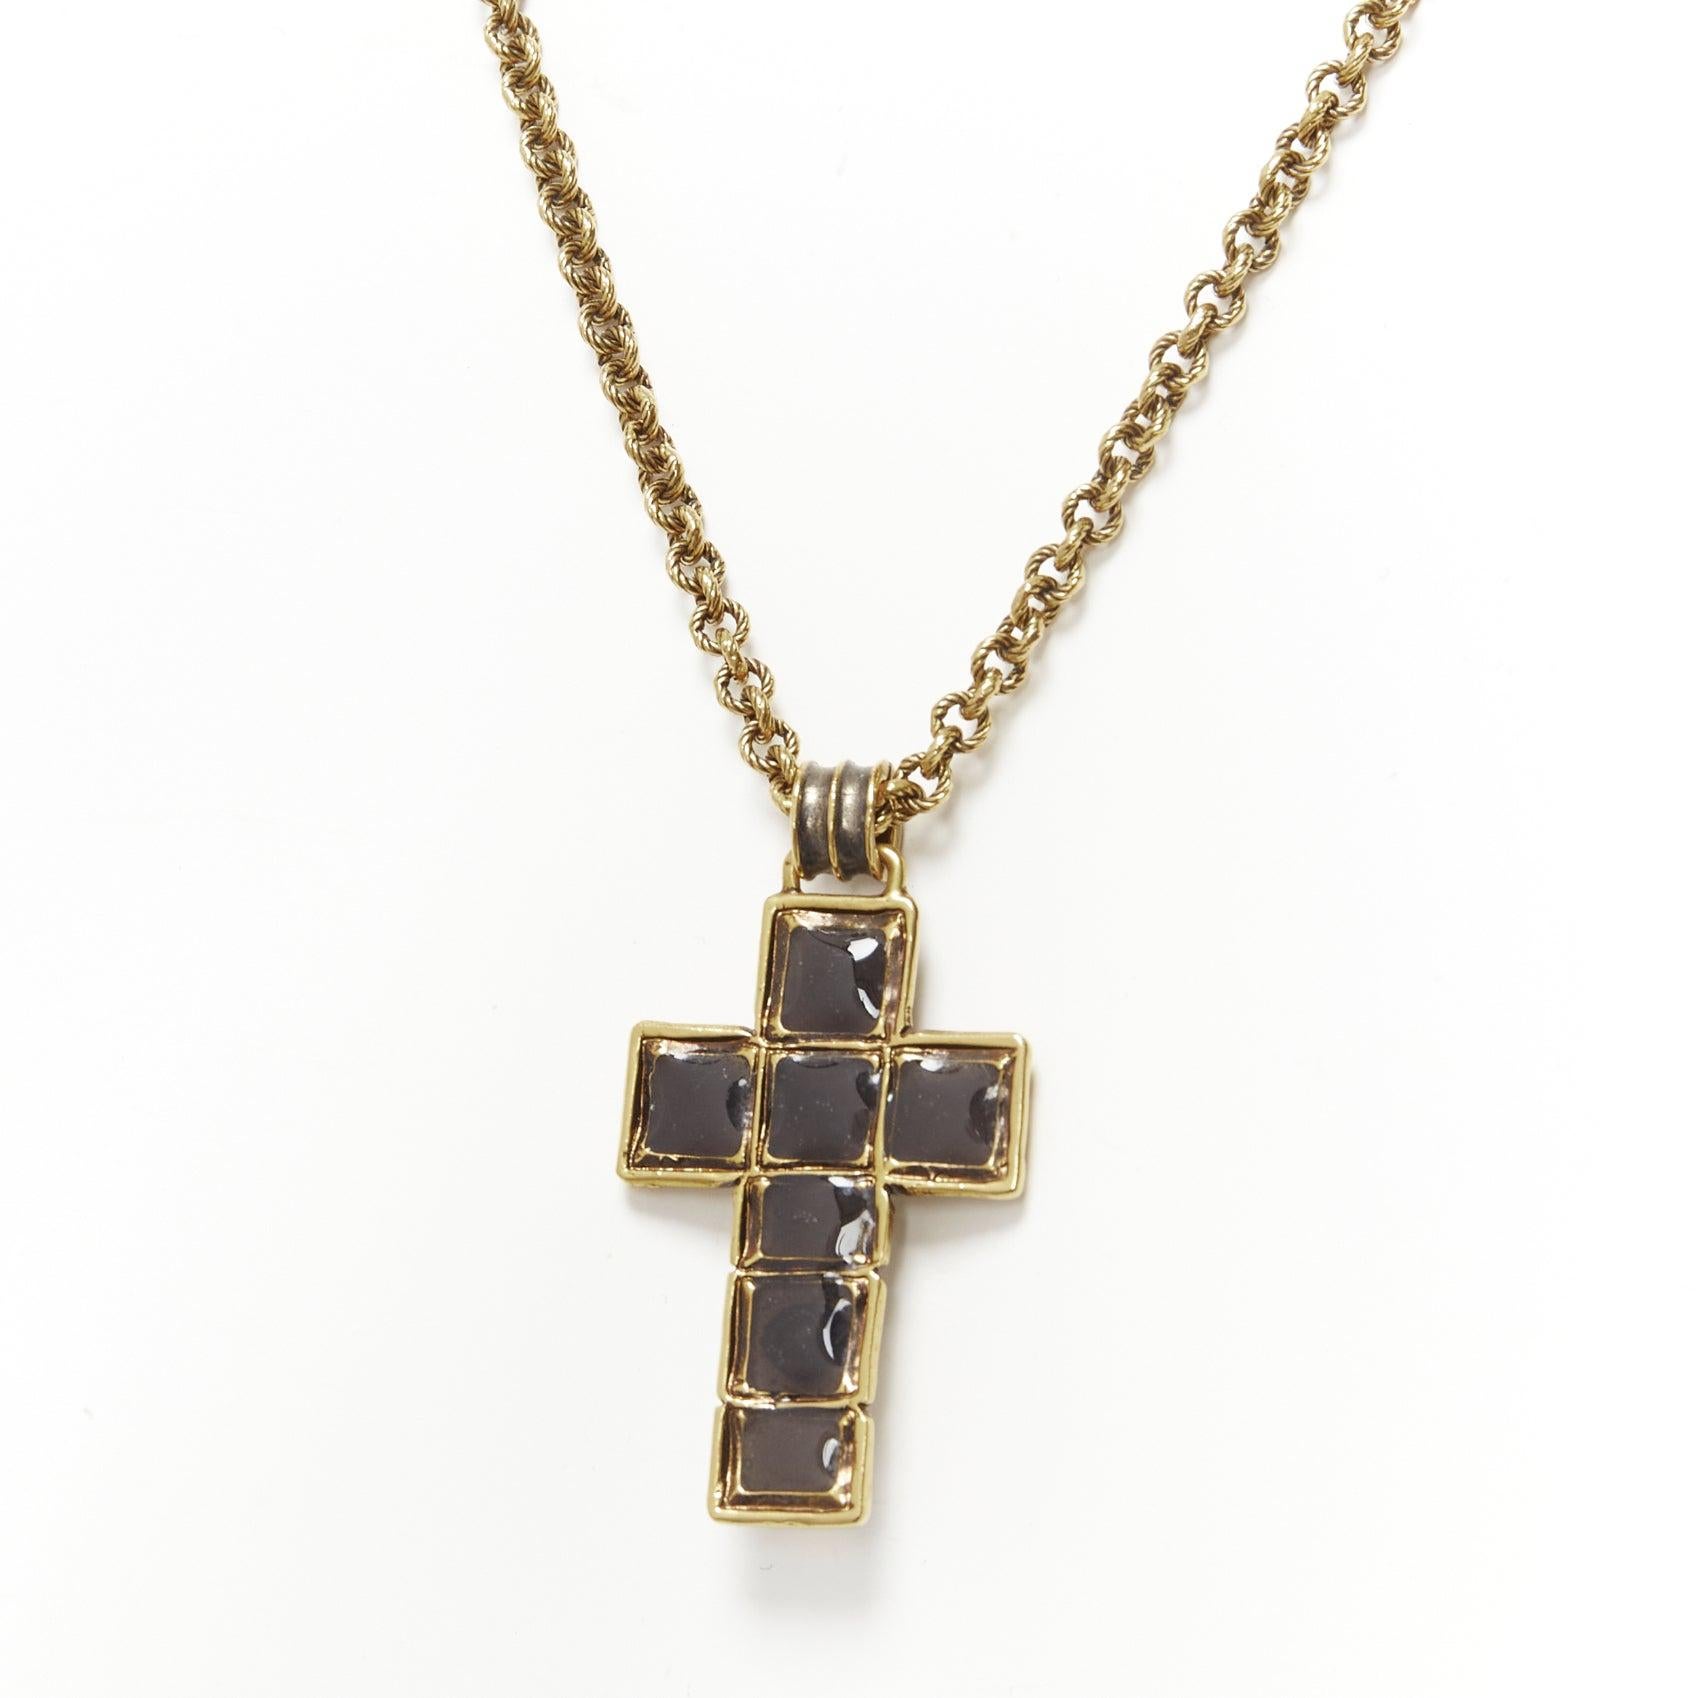 GUCCI Michele black resin Byzantine Cross GG logo charm necklace
Reference: TGAS/D00884
Brand: Gucci
Designer: Alessandro Michele
Material: Metal, Resin
Color: Gold, Black
Pattern: Solid
Closure: Lobster Clasp
Lining: Gold Metal
Extra Details: GG